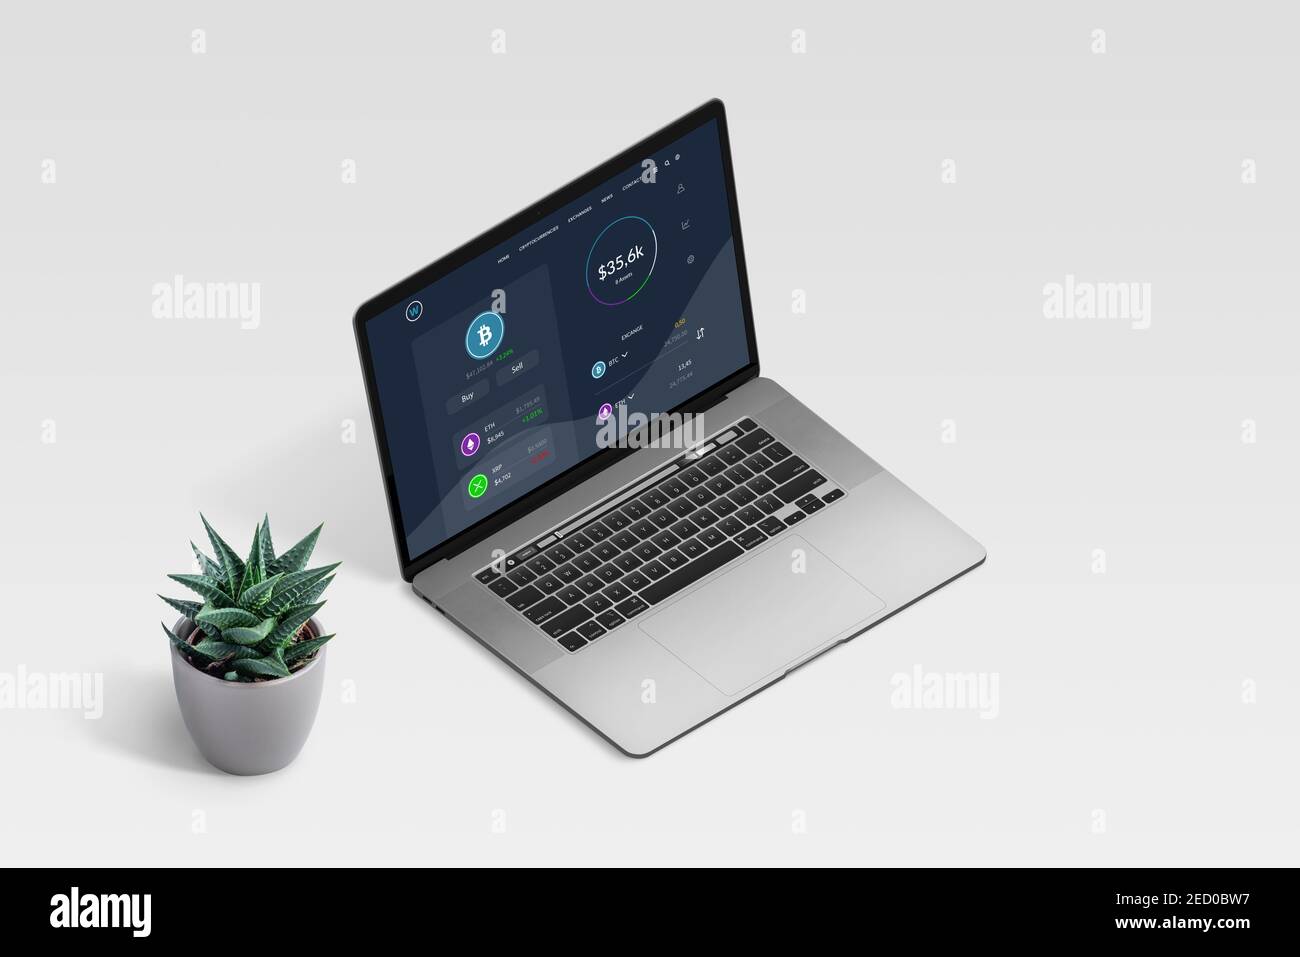 Cryptocurrency prices and exchange web page concept on laptop computer. Laptop on clean, white desk with plant beside. Isometric position Stock Photo